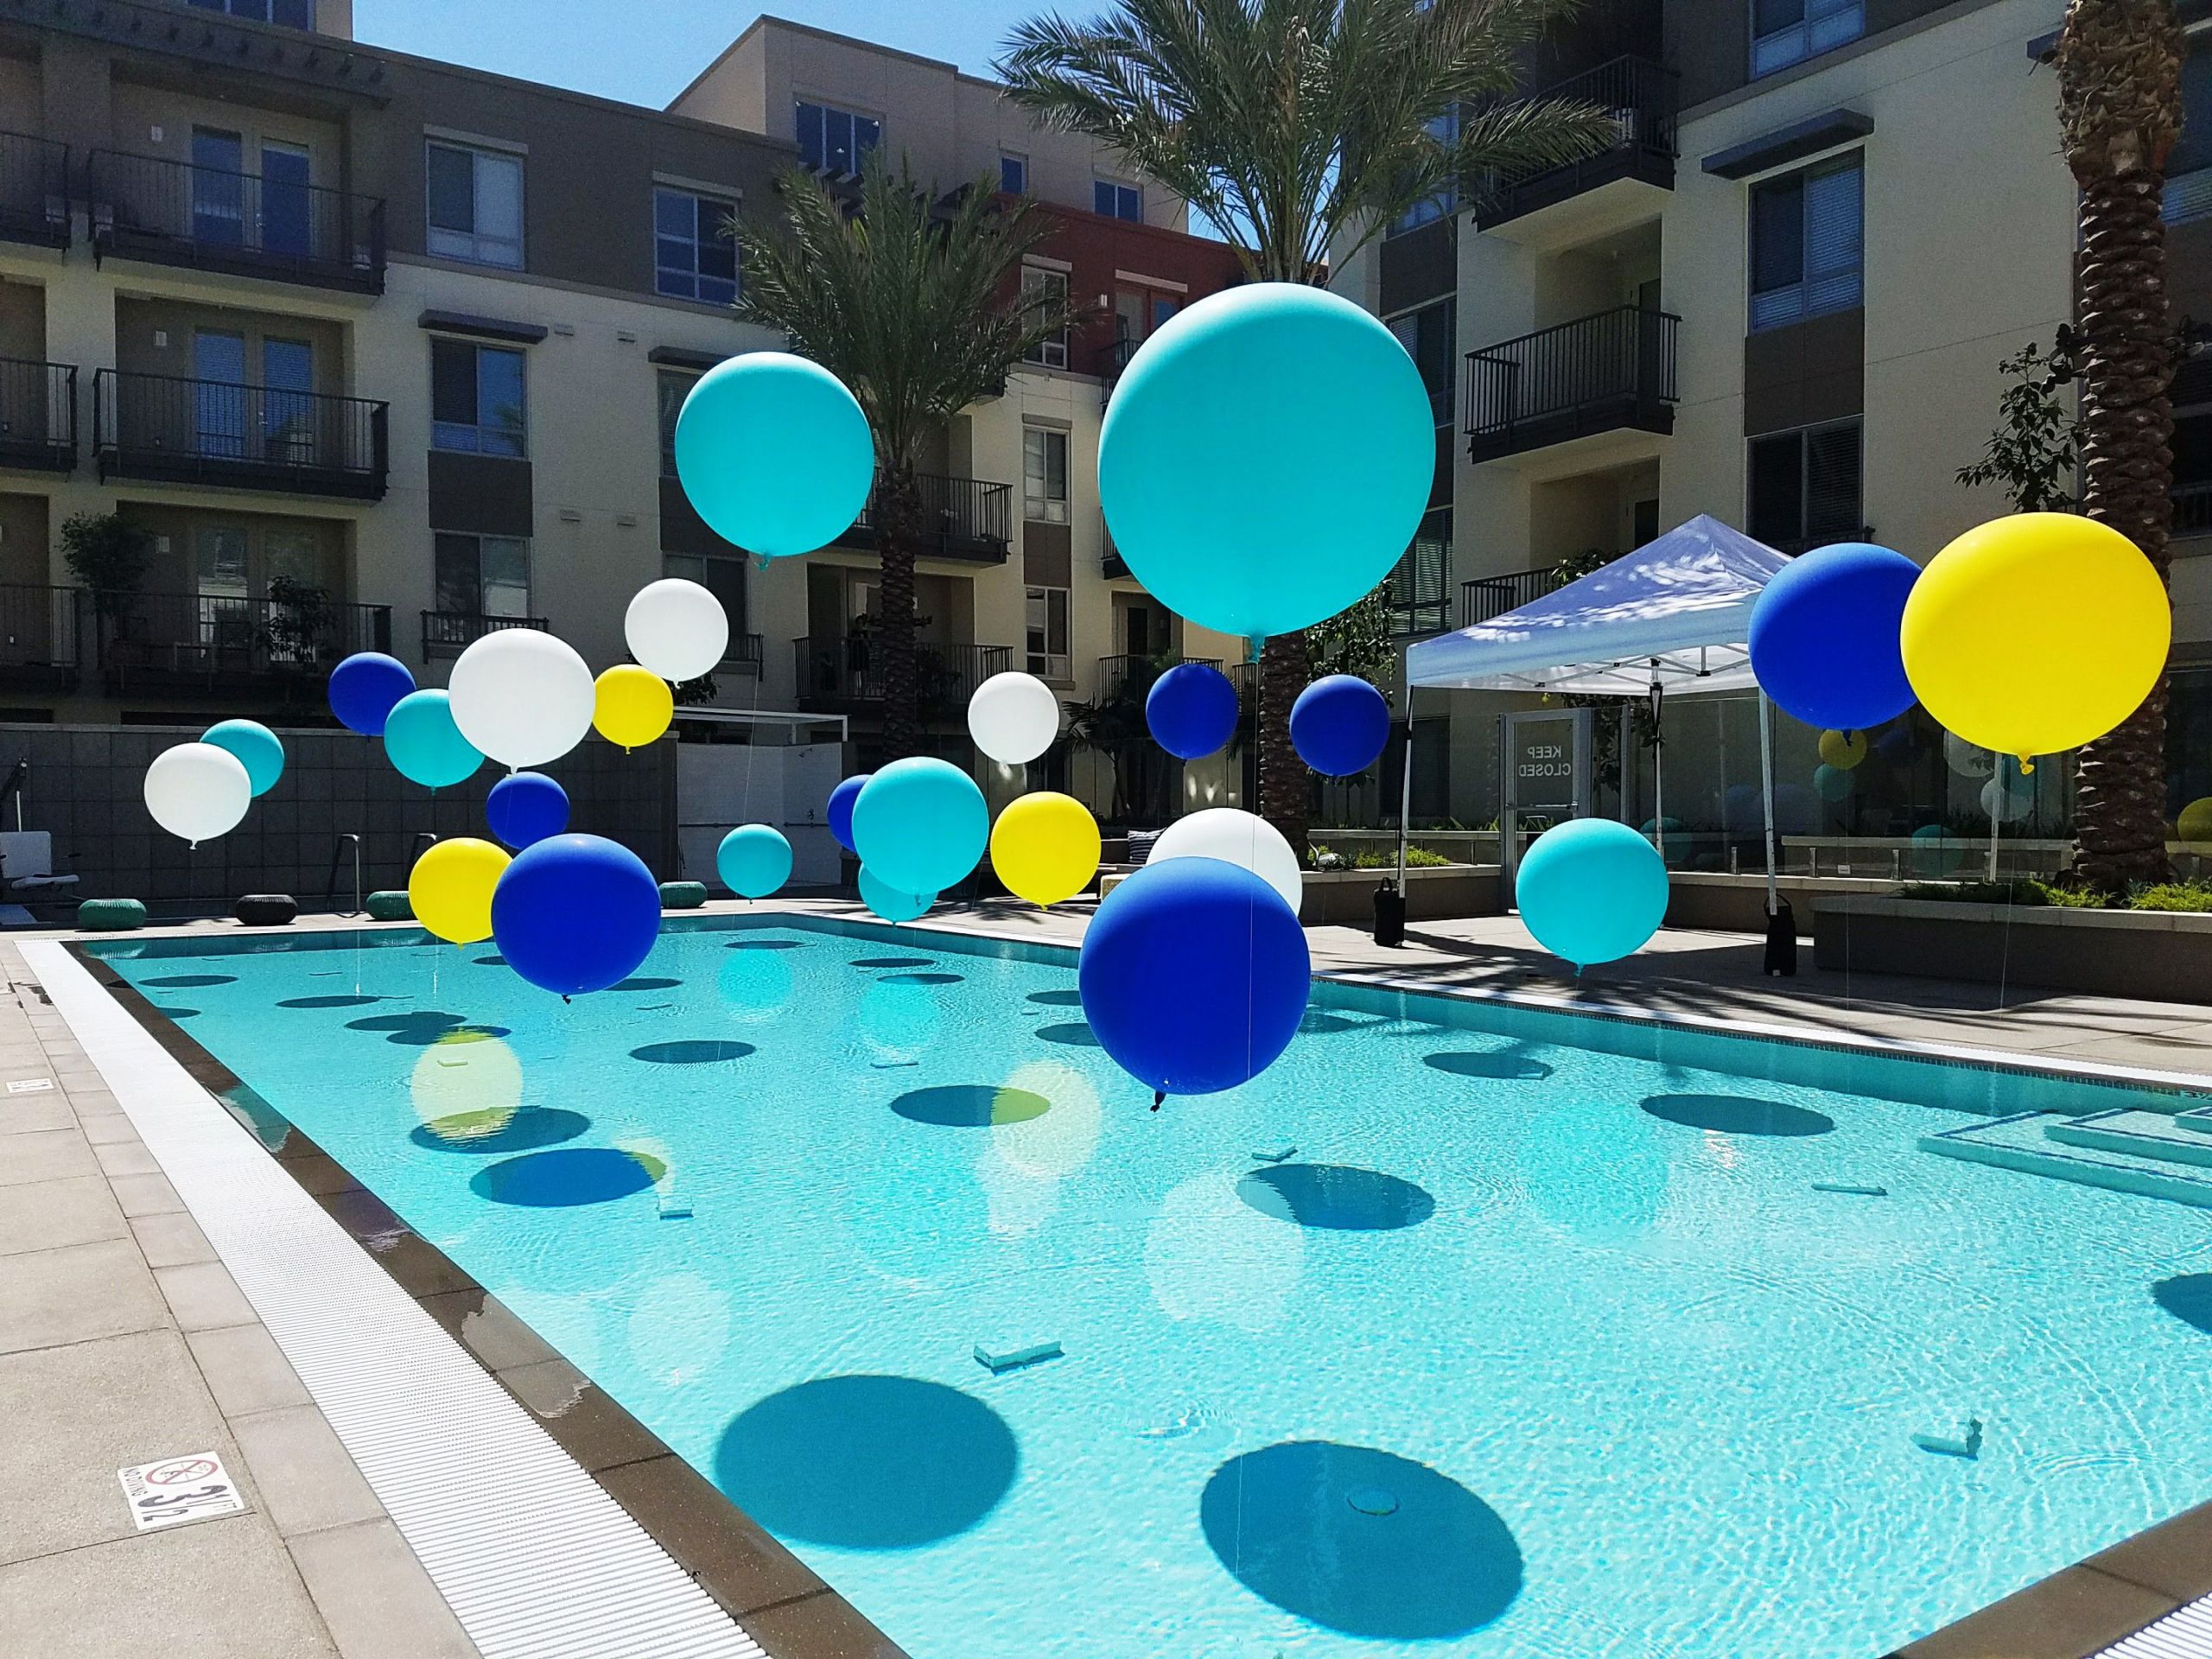 Swimming Pool Party Ideas
 Pool balloons summer party pool party party ideas in